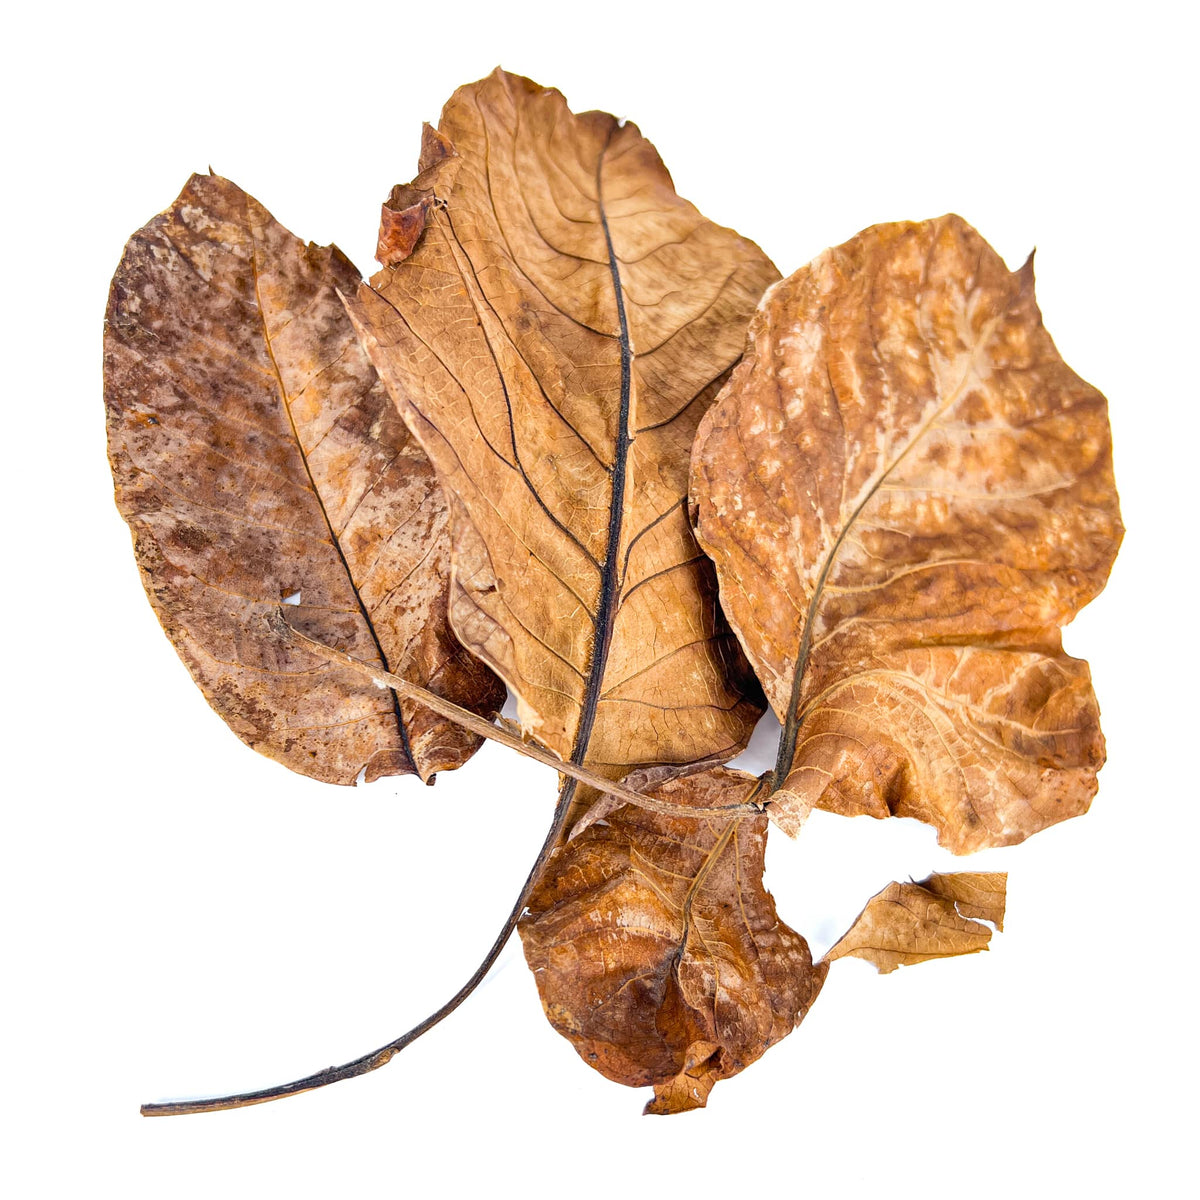 Pile of brown, white, and tan persian walnut leaves for aquariums and terrariums by Betta Botanicals.